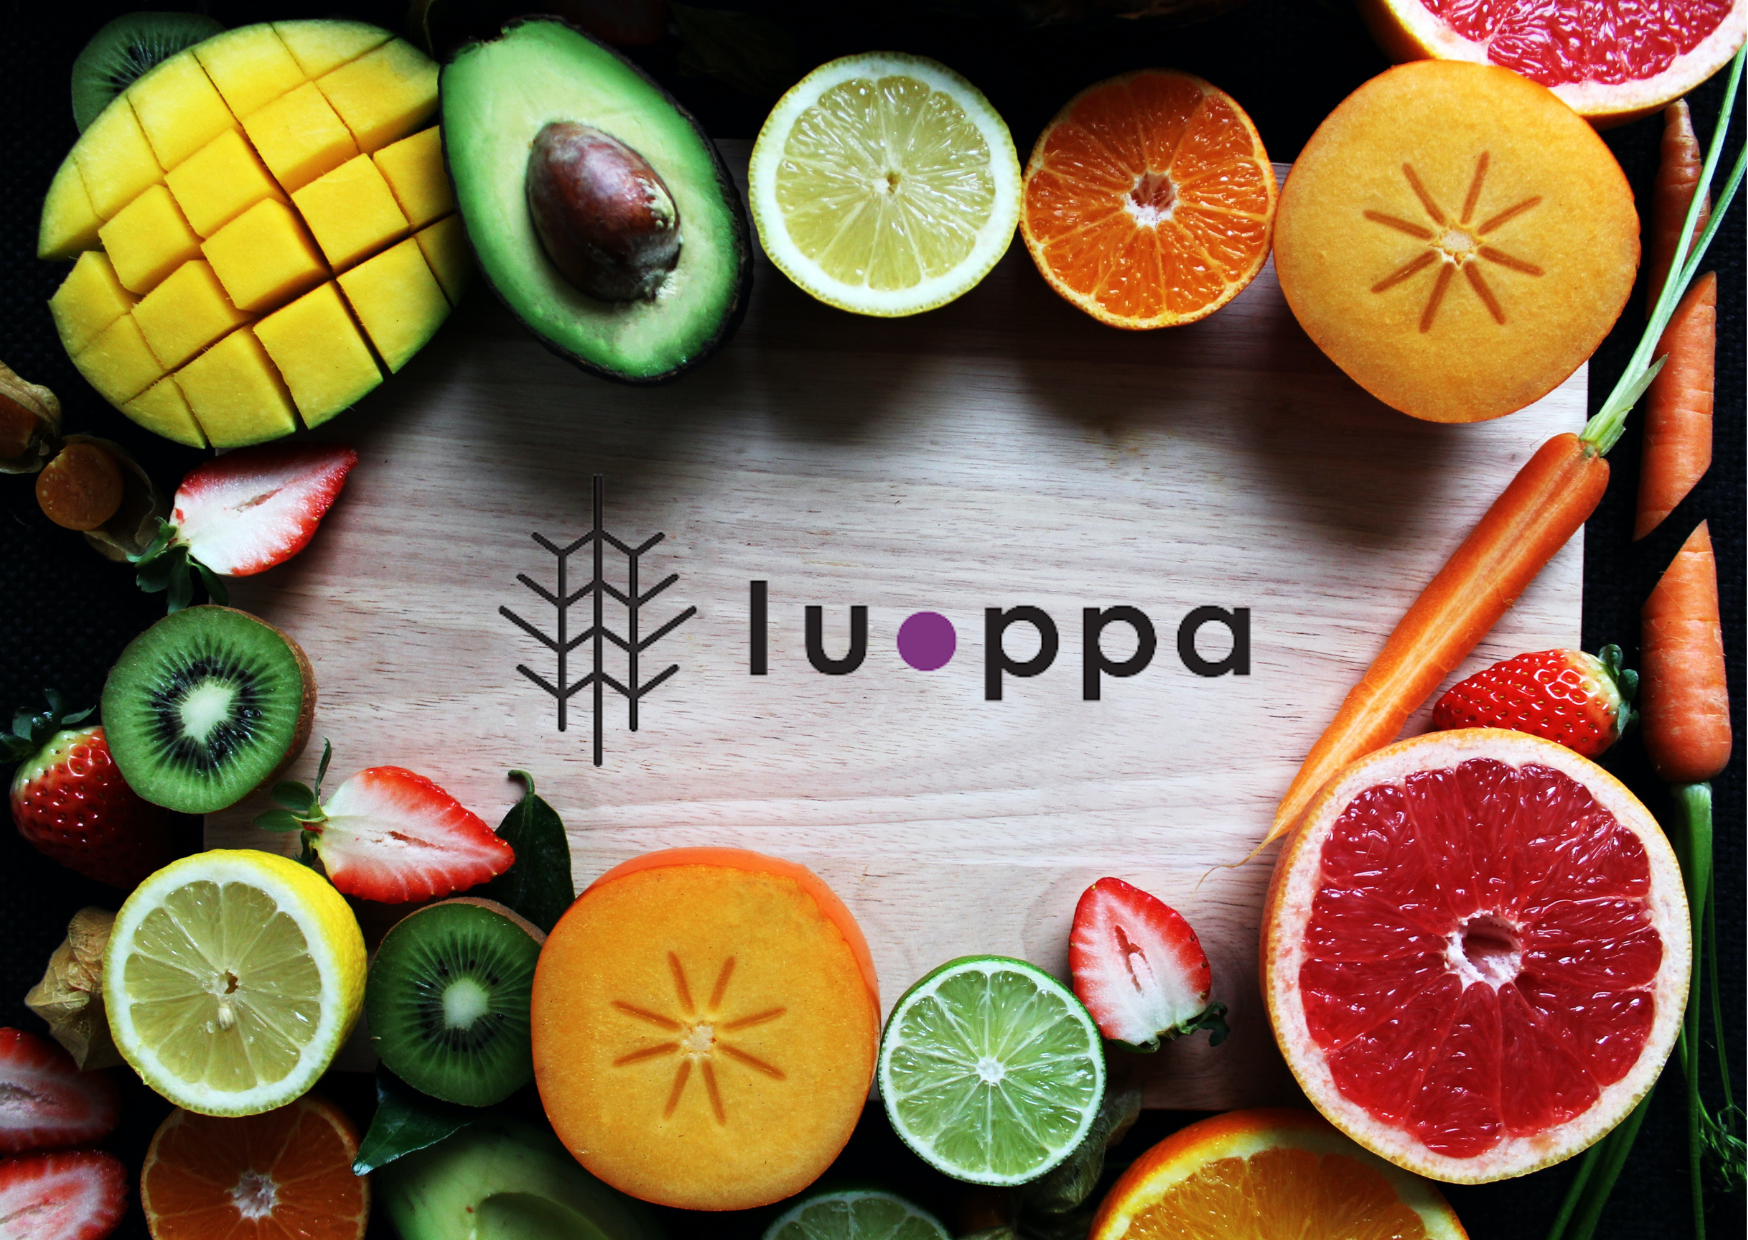 LUPPA completes 1 year and consolidates itself as the largest laboratory of cities in the area of food systems